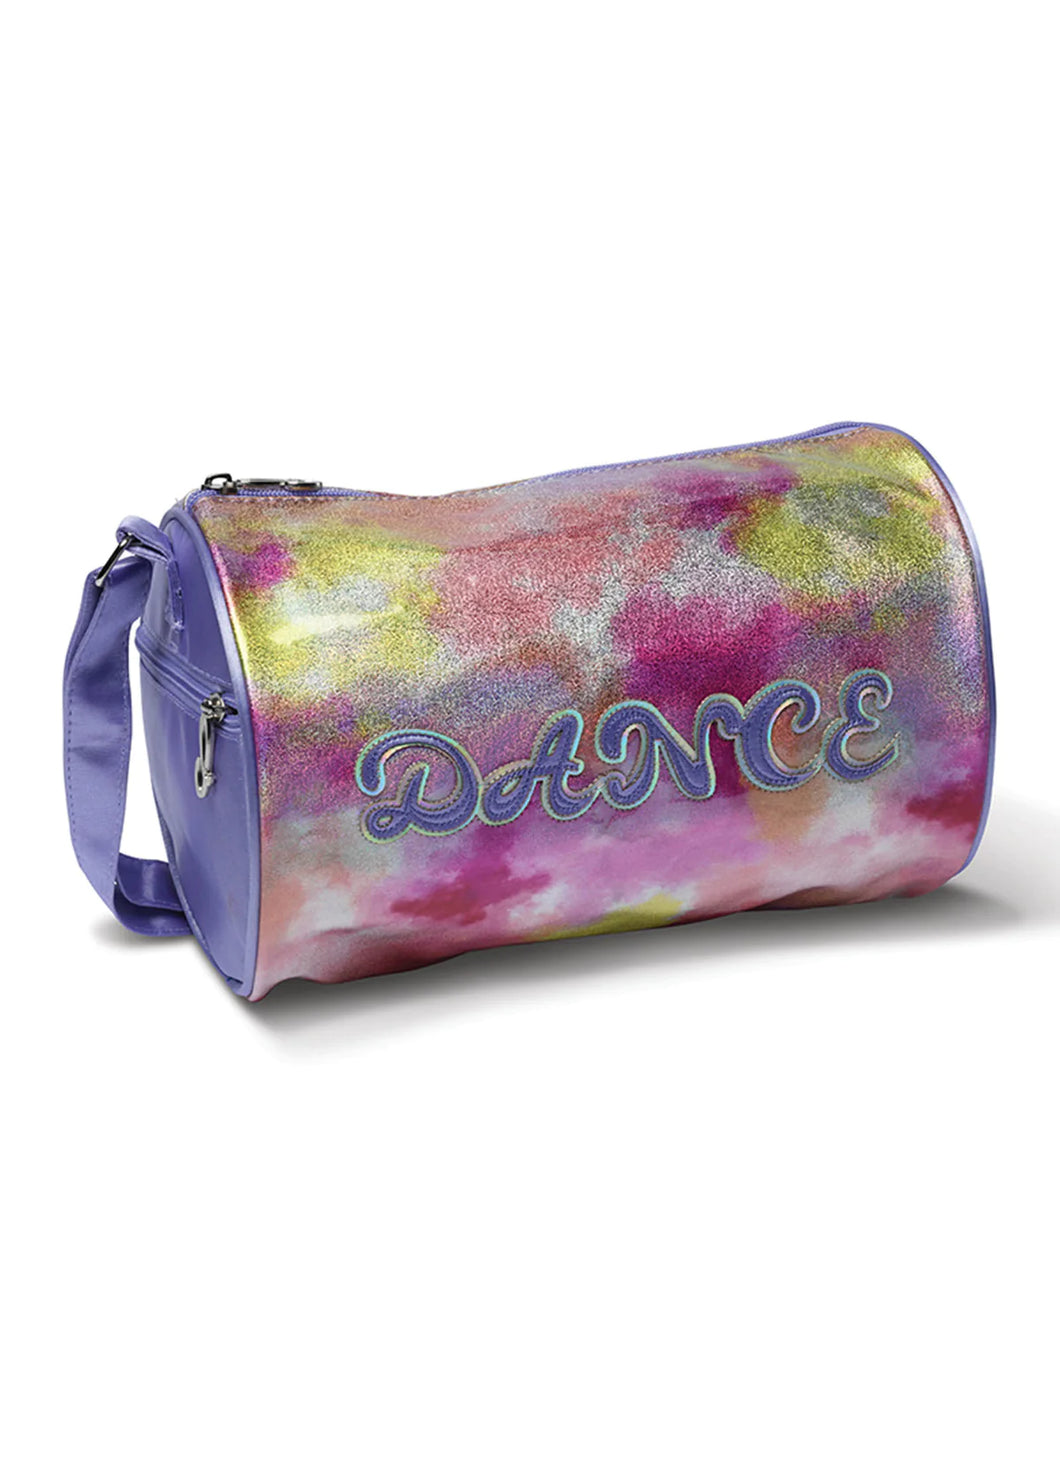 My Sparkly Watercolor Duffle